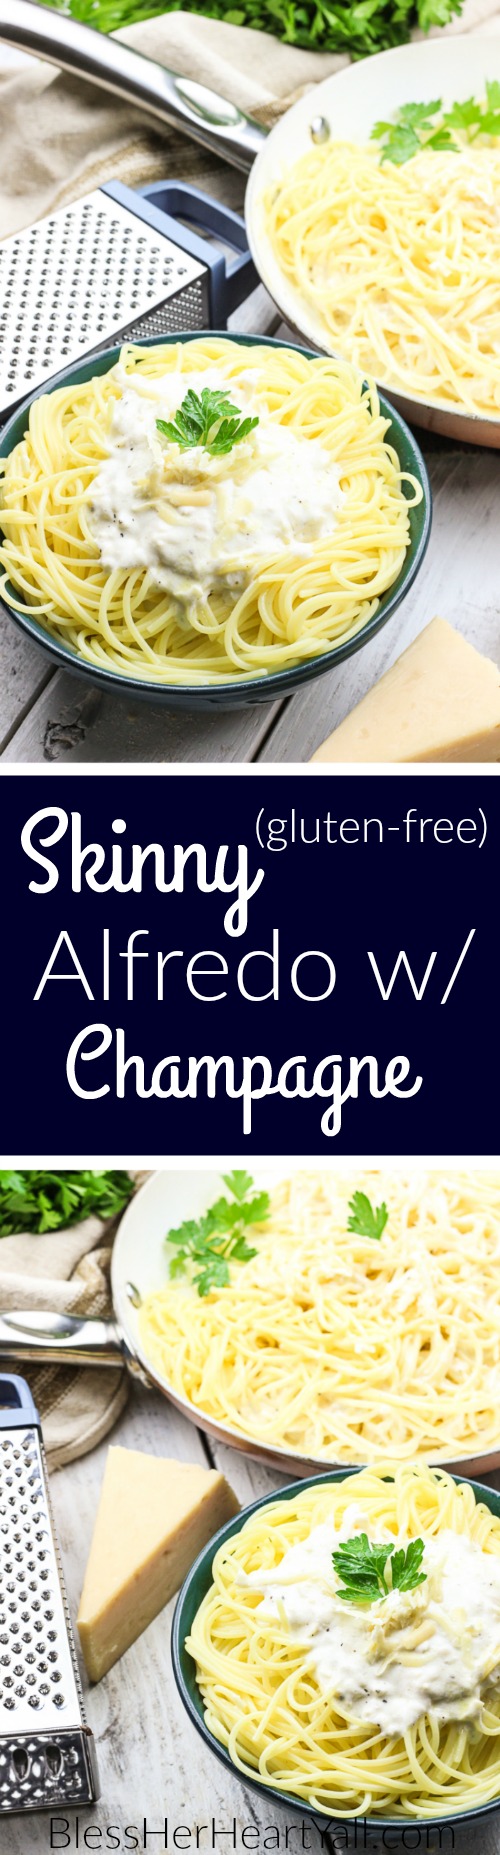 This Skinny Champagne Alfredo recipe is amazing and quick to make! Instead of those heavy unhealthy creams, healthy greek yogurt is used! And if we needed a reason to use up extra New Year's Eve champagne, here it is! It is used in lieu of chicken broth or white wine in the typical alfredo sauce! Cream, healthy, fun deliciousness! www.blessherheartyall.com